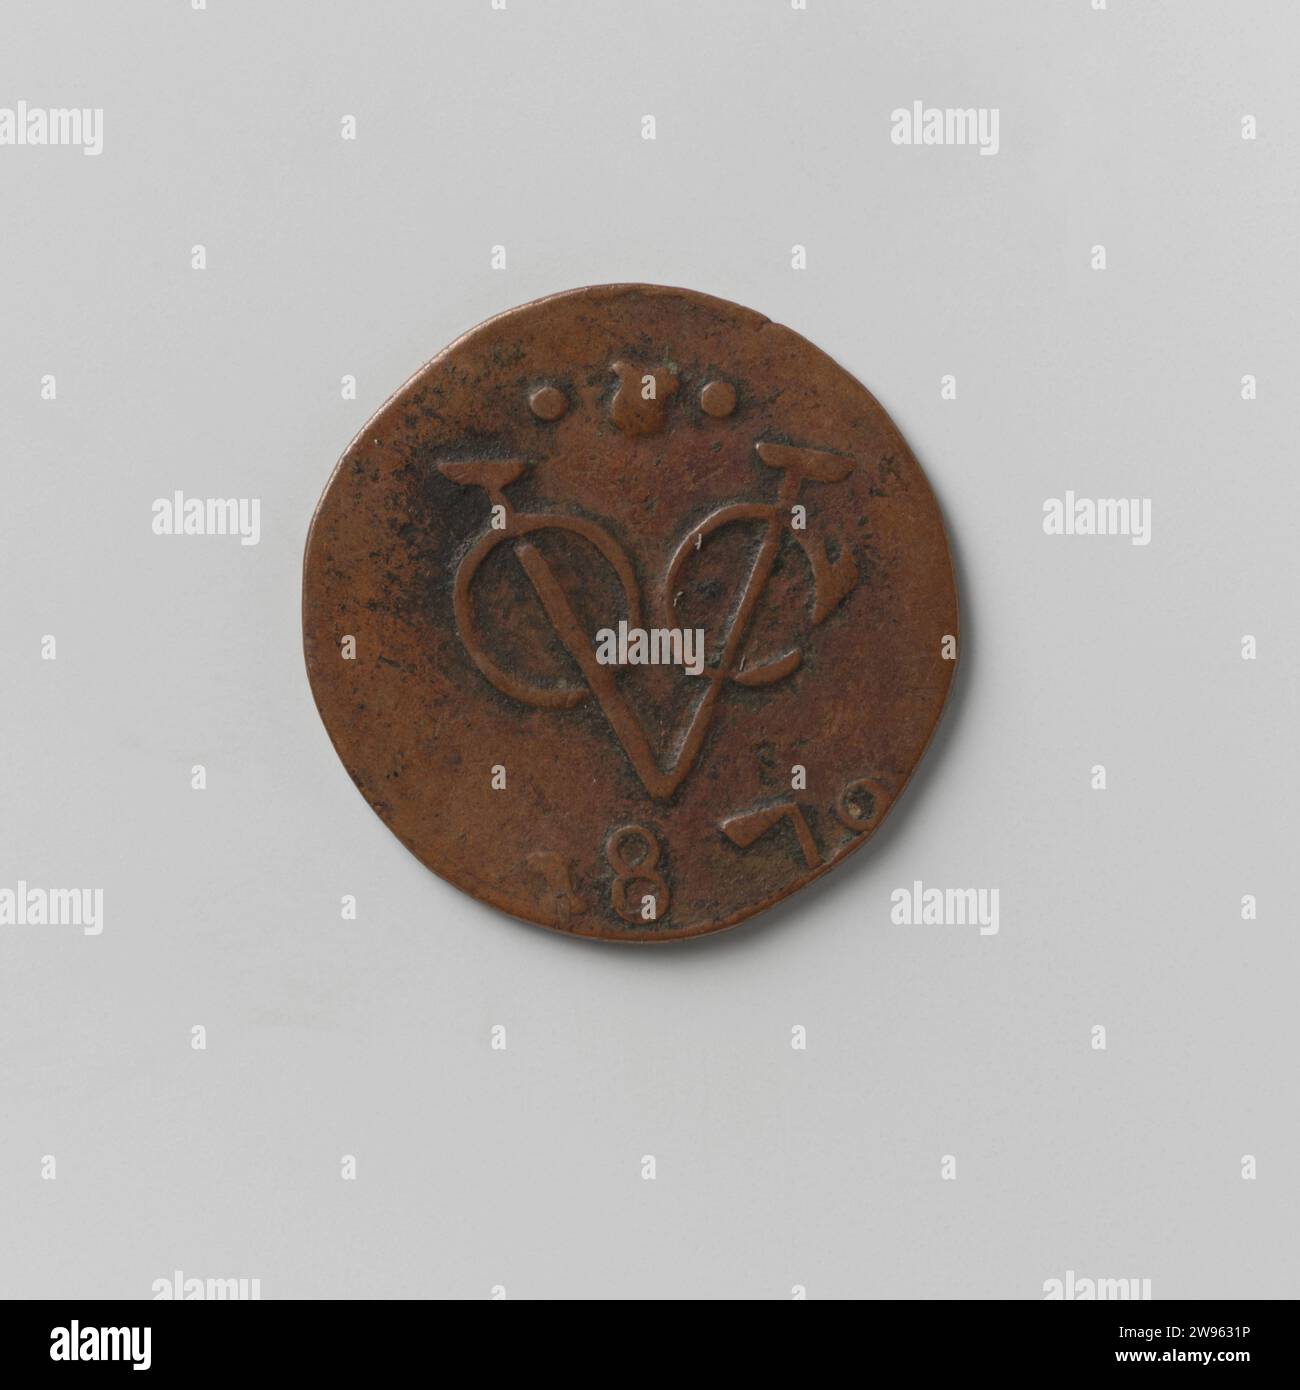 Imitation of a penny from the VOC from Utrecht, 1870 ,, 1830 - 1870 coin Copper mint. Imitation of Dang of the VOC from Utrecht. Front: two lions held by Utrecht's coat of arms, including decoration. Reverse: monogram of the VOC, above which mint sign and including fictional year. Banjarmasin copper (metal) striking (metalworking) Stock Photo